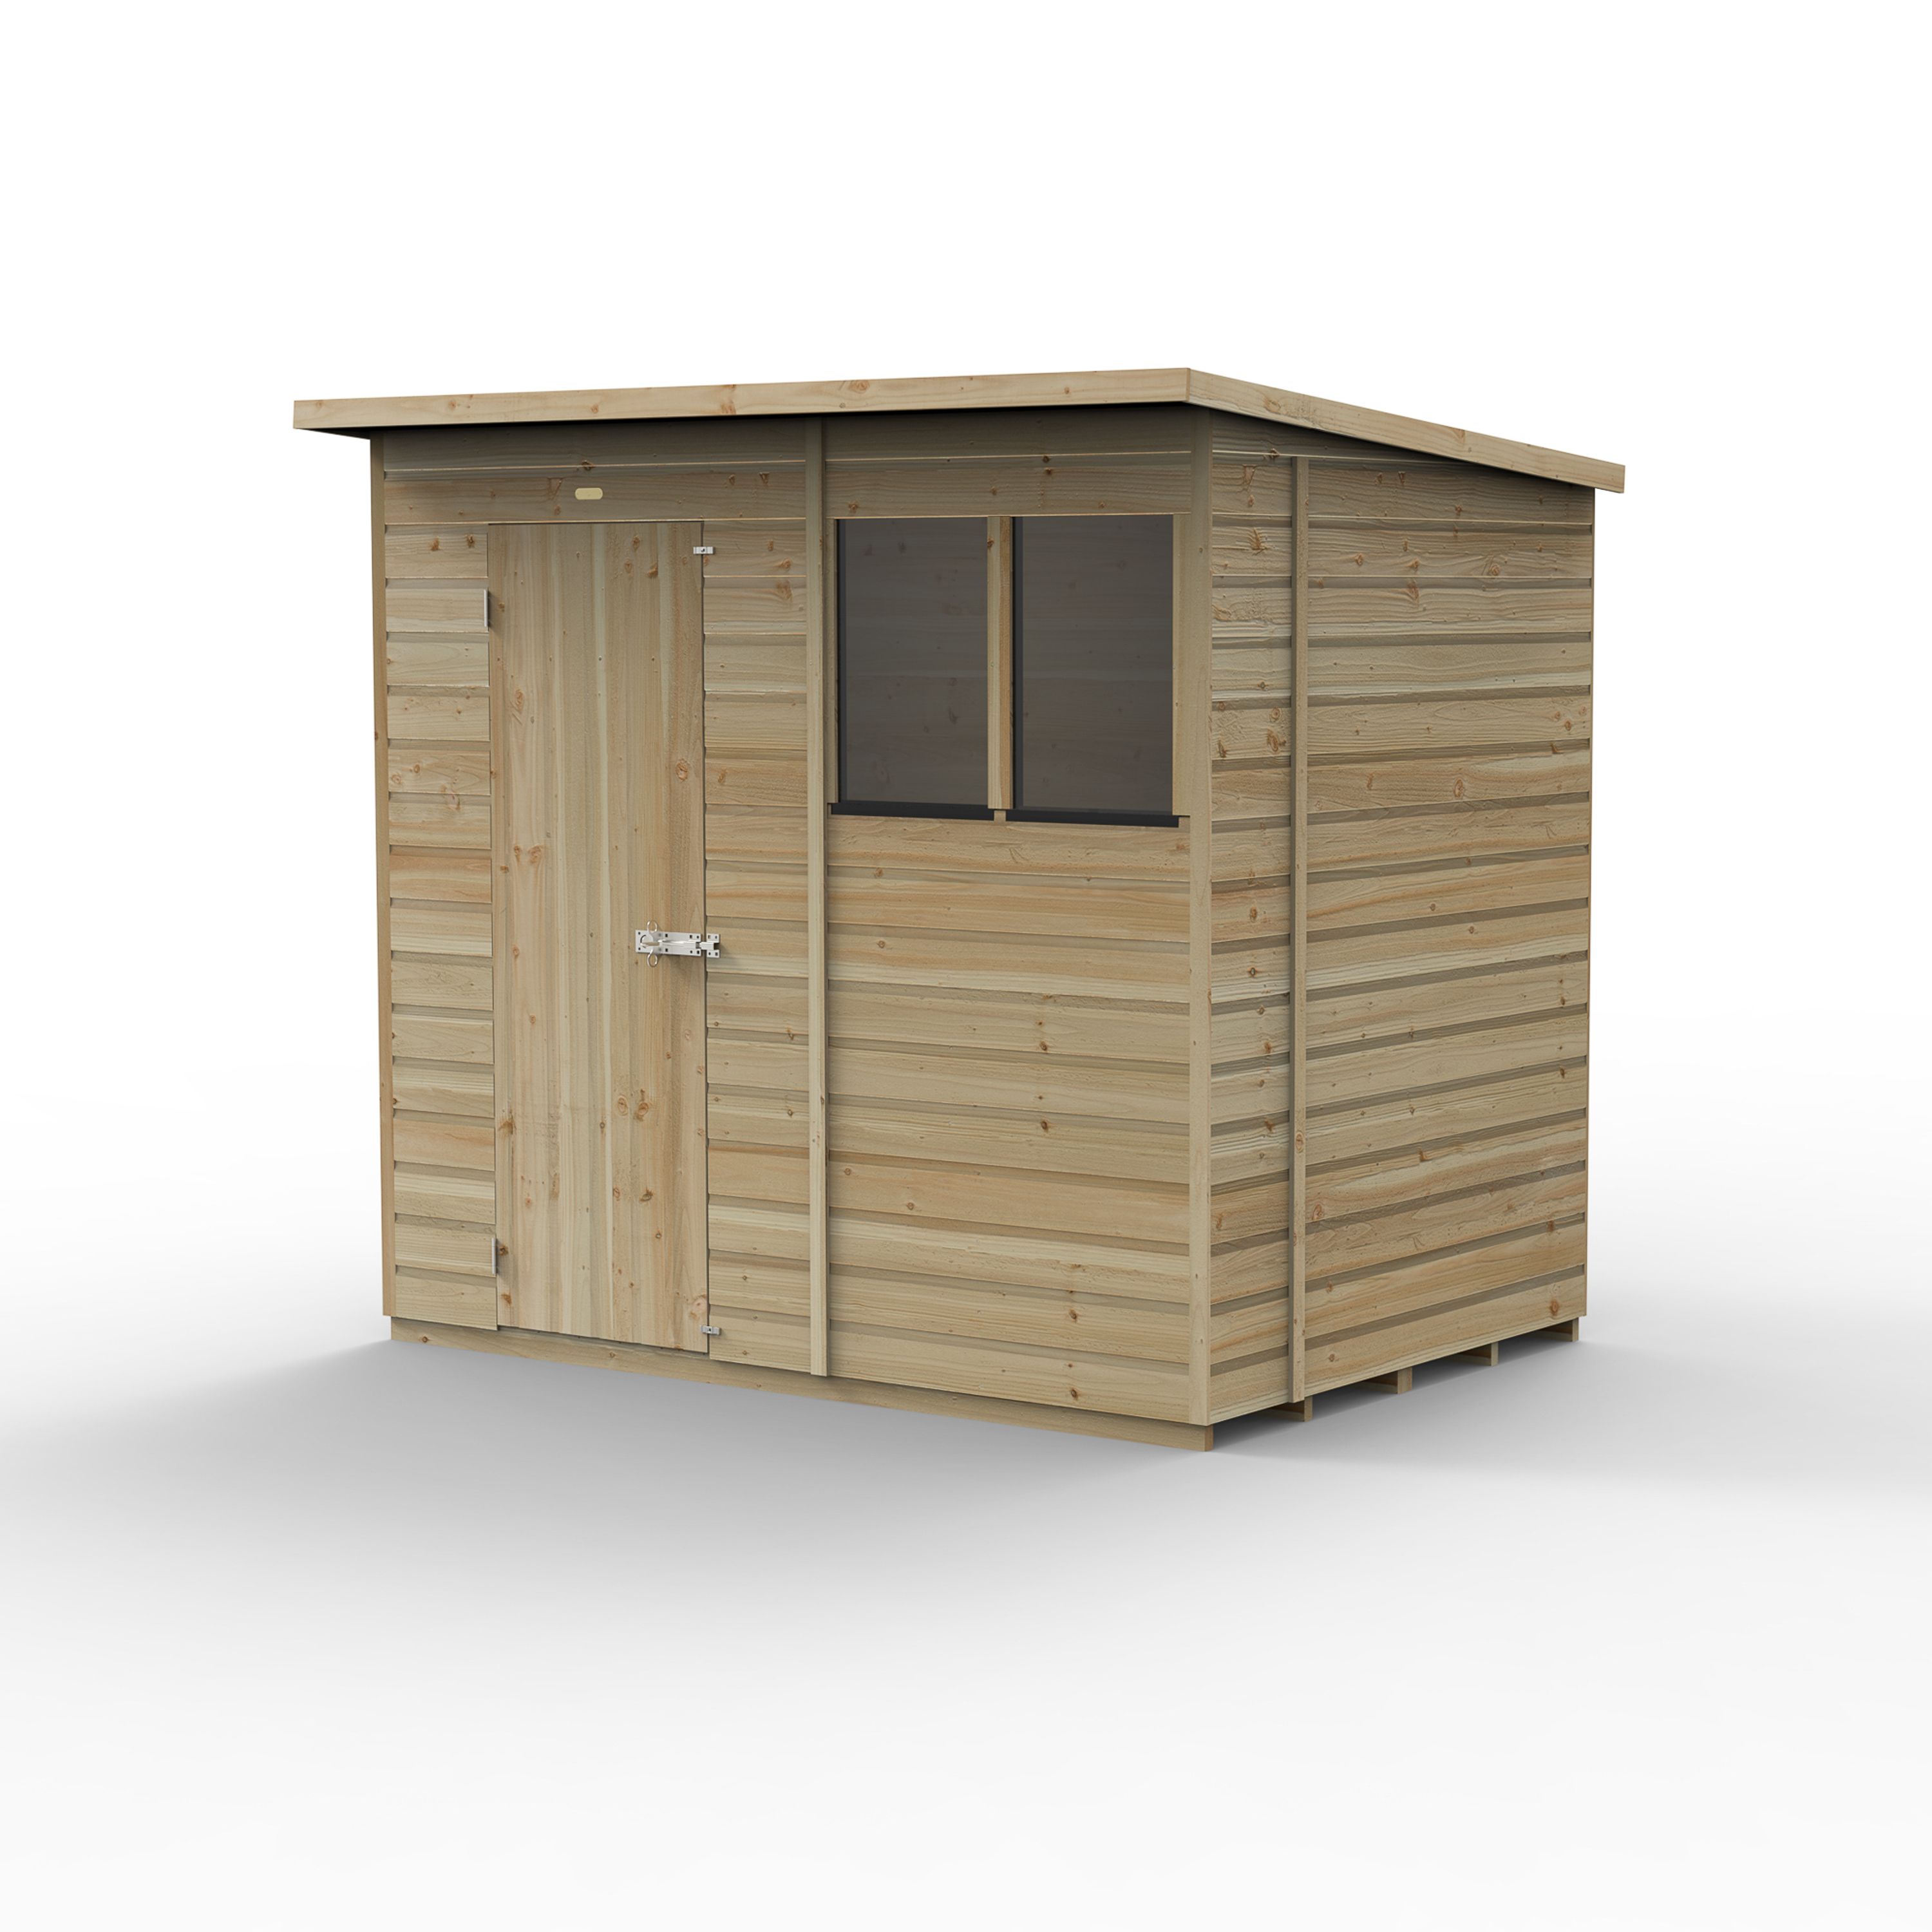 Forest Garden Beckwood 7x5 ft Pent Natural timber Wooden Shed with floor & 2 windows (Base included) - Assembly not required